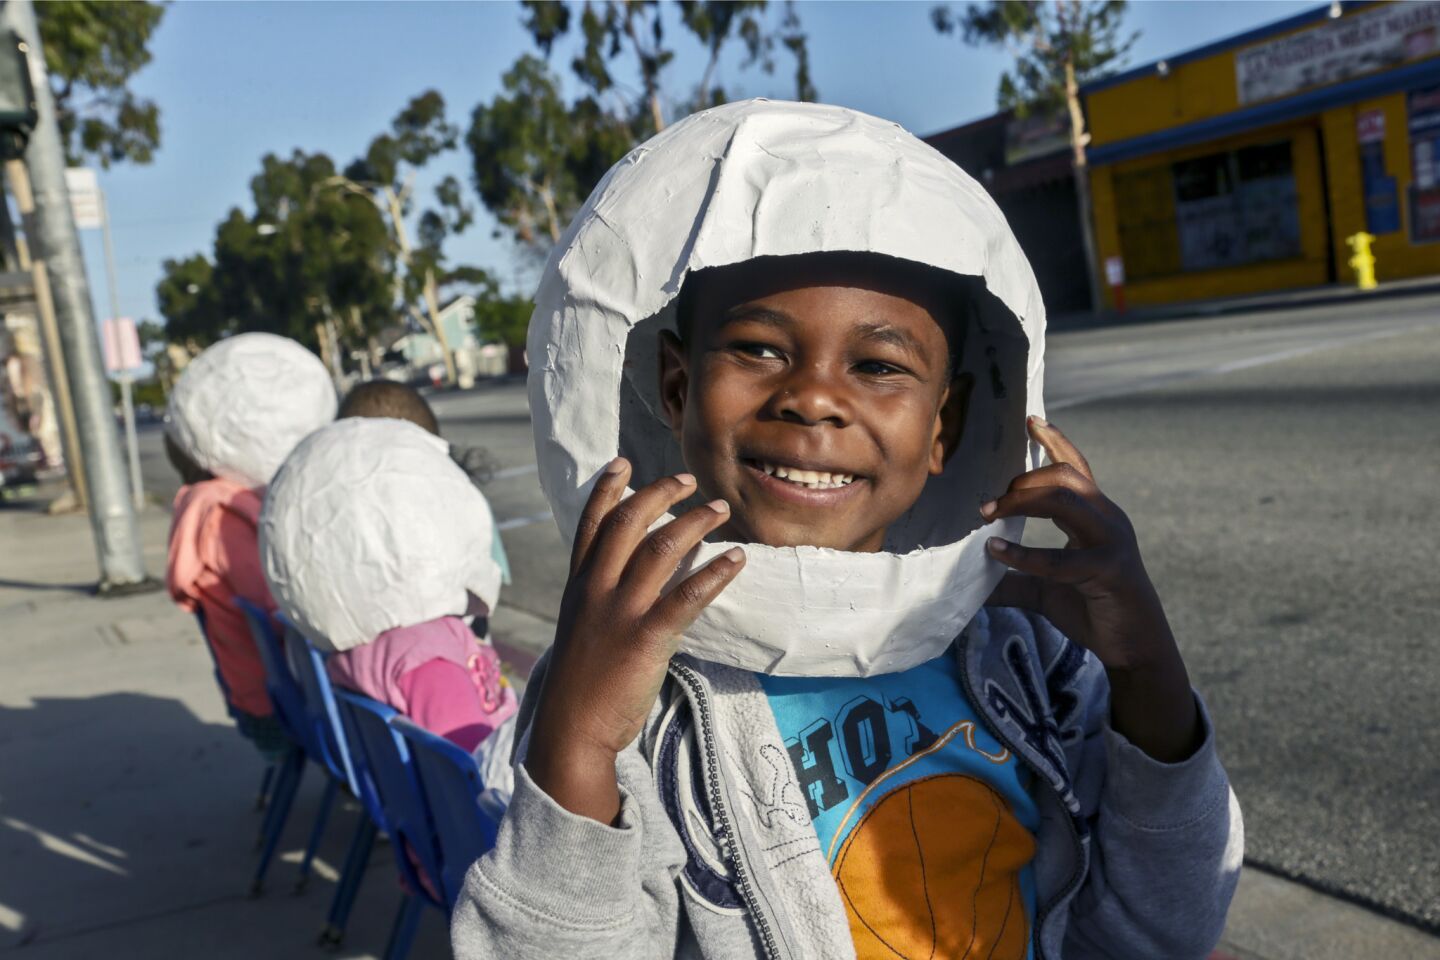 Adren Turner dons an astronaut helmet made from paper as he waits to see ET-94, NASA's last remaining space shuttle external tank, along Arbor Vitae Street in Inglewood.